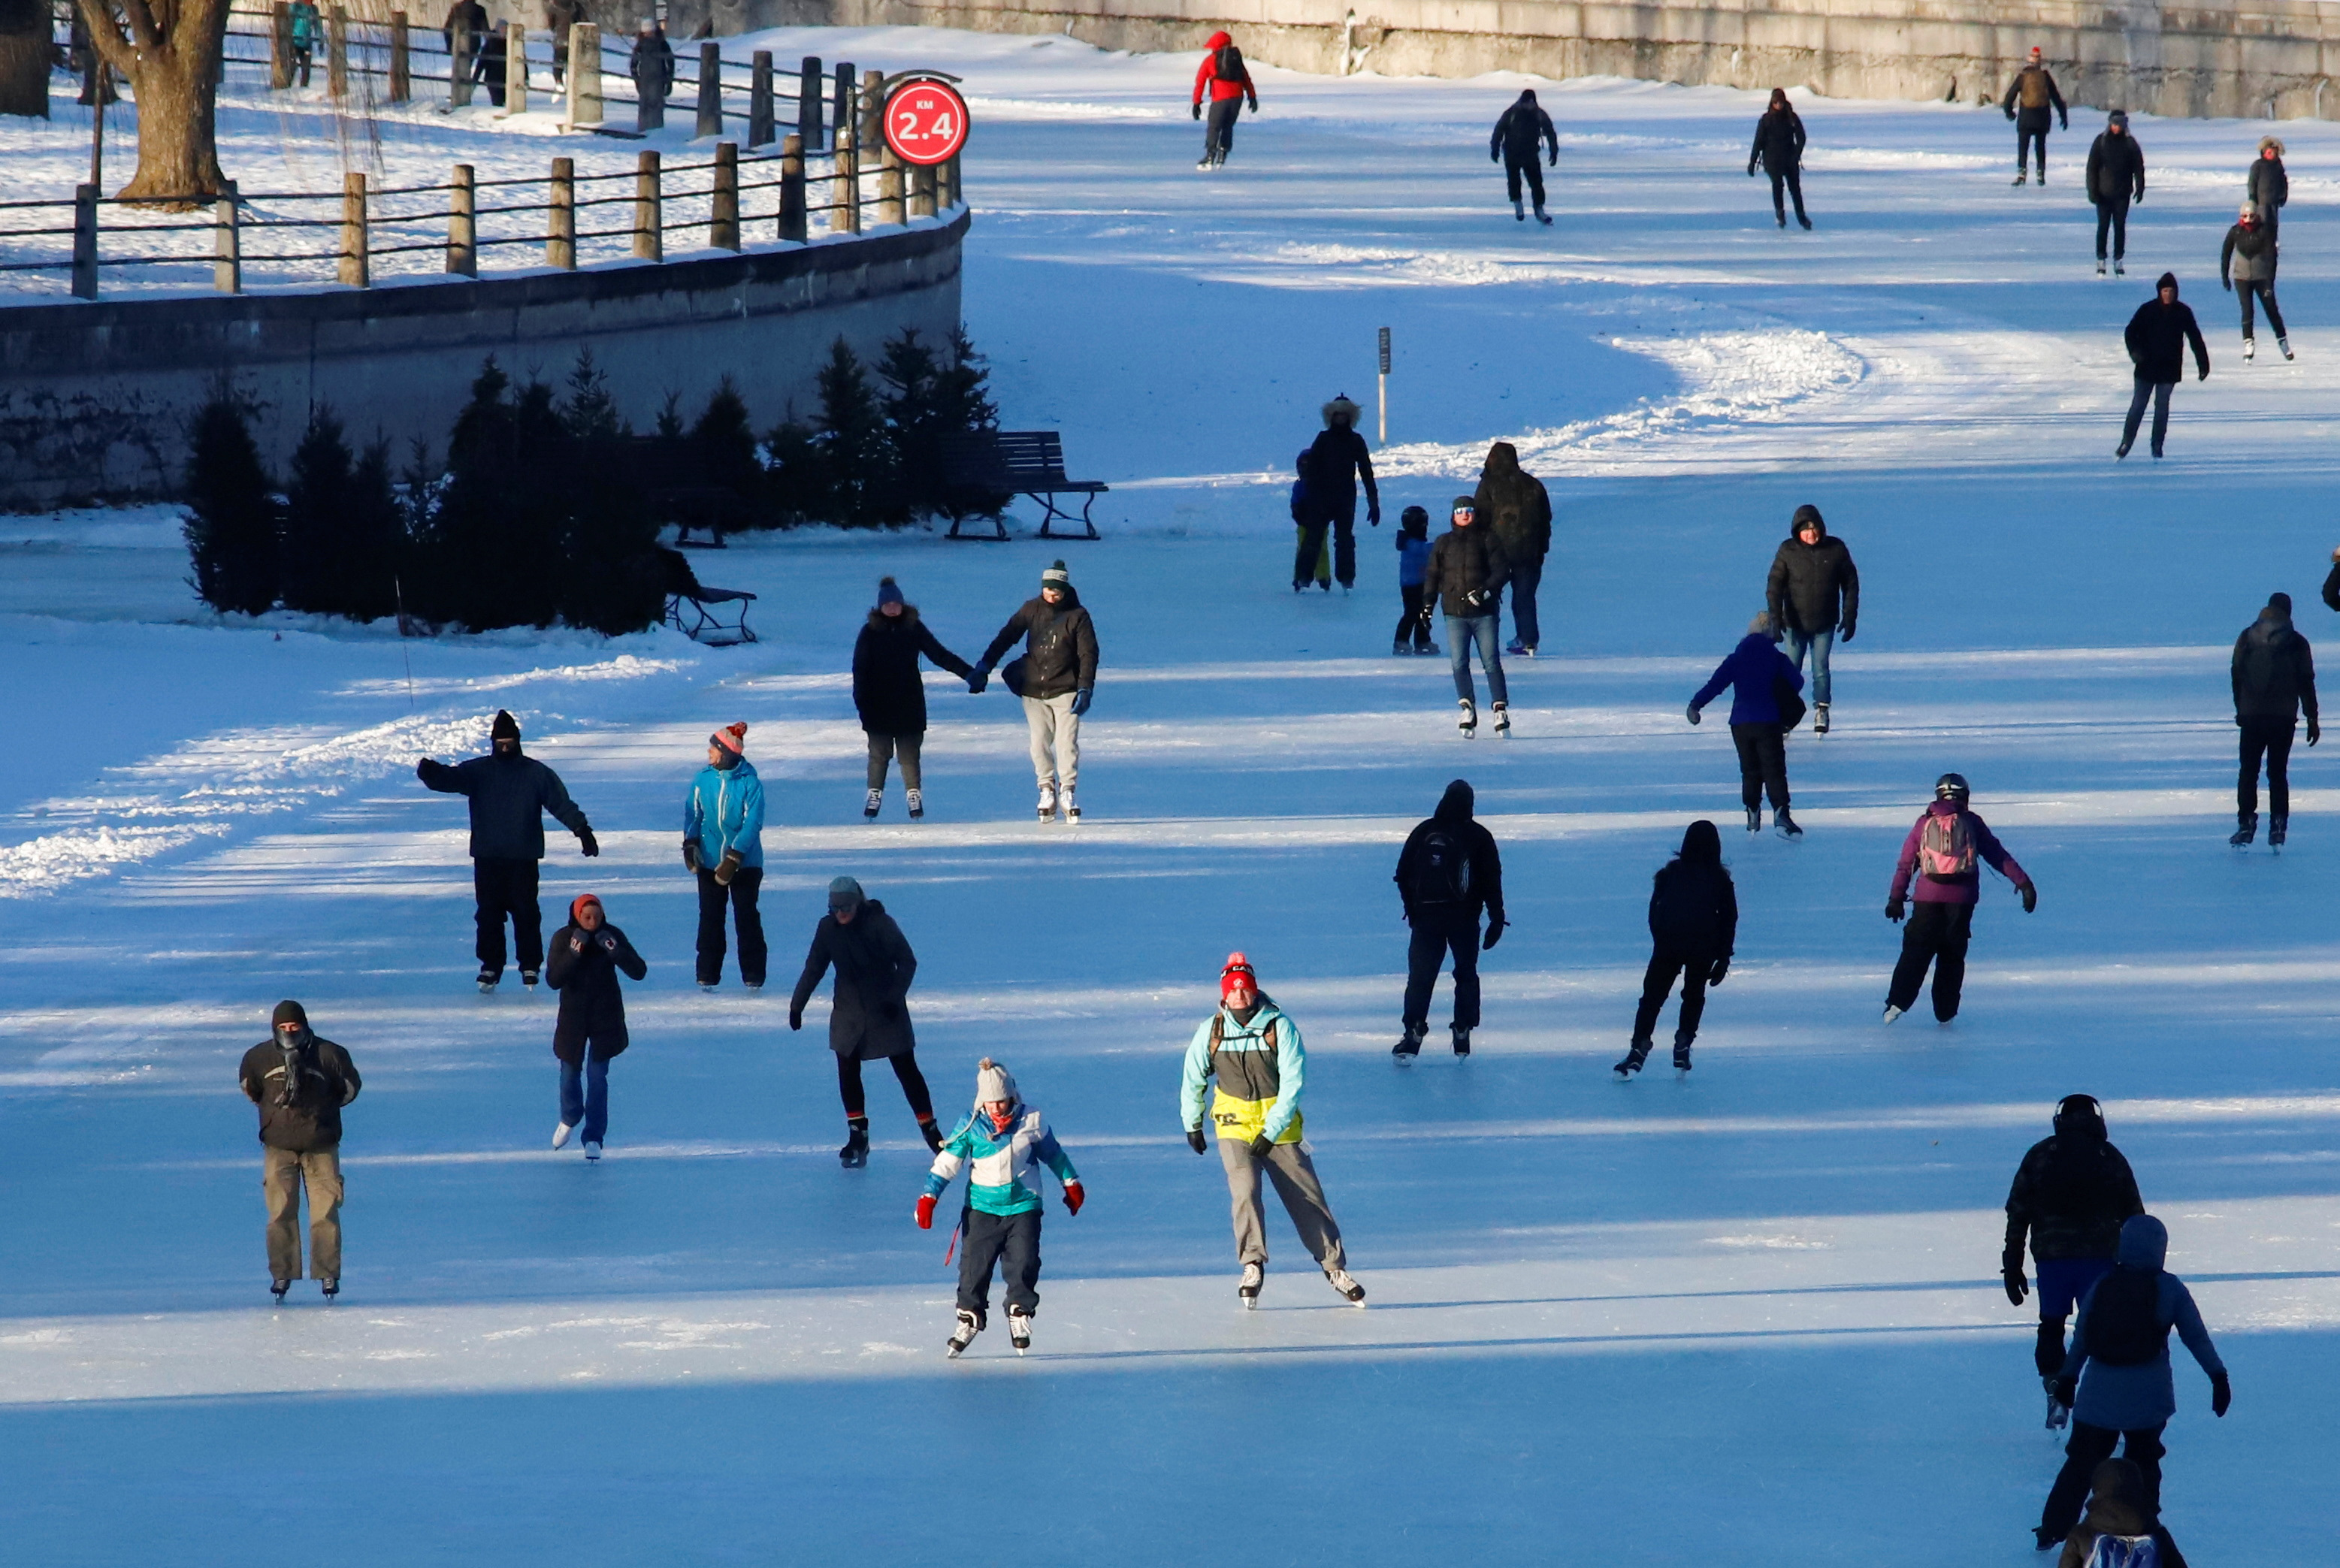 People skate on the Rideau Canal Skateway, the world's largest skating rink, during a period of subzero Arctic weather in Ottawa